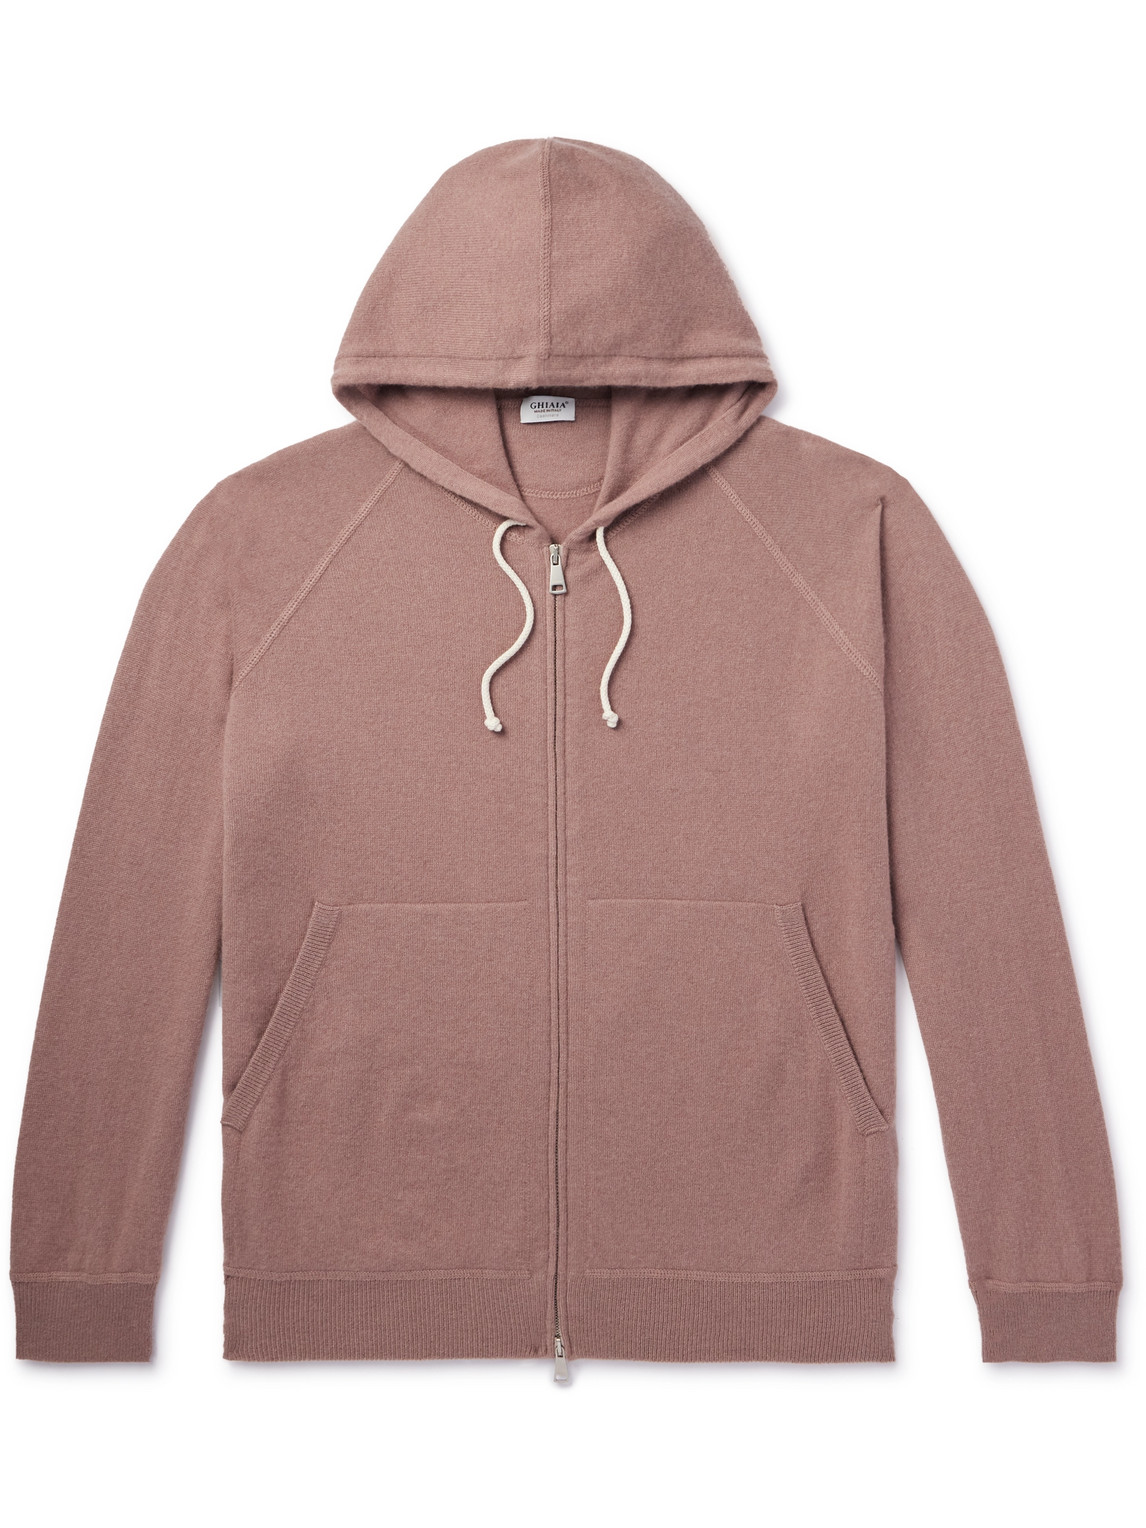 Ghiaia Cashmere Cashmere Zip-up Hoodie In Pink